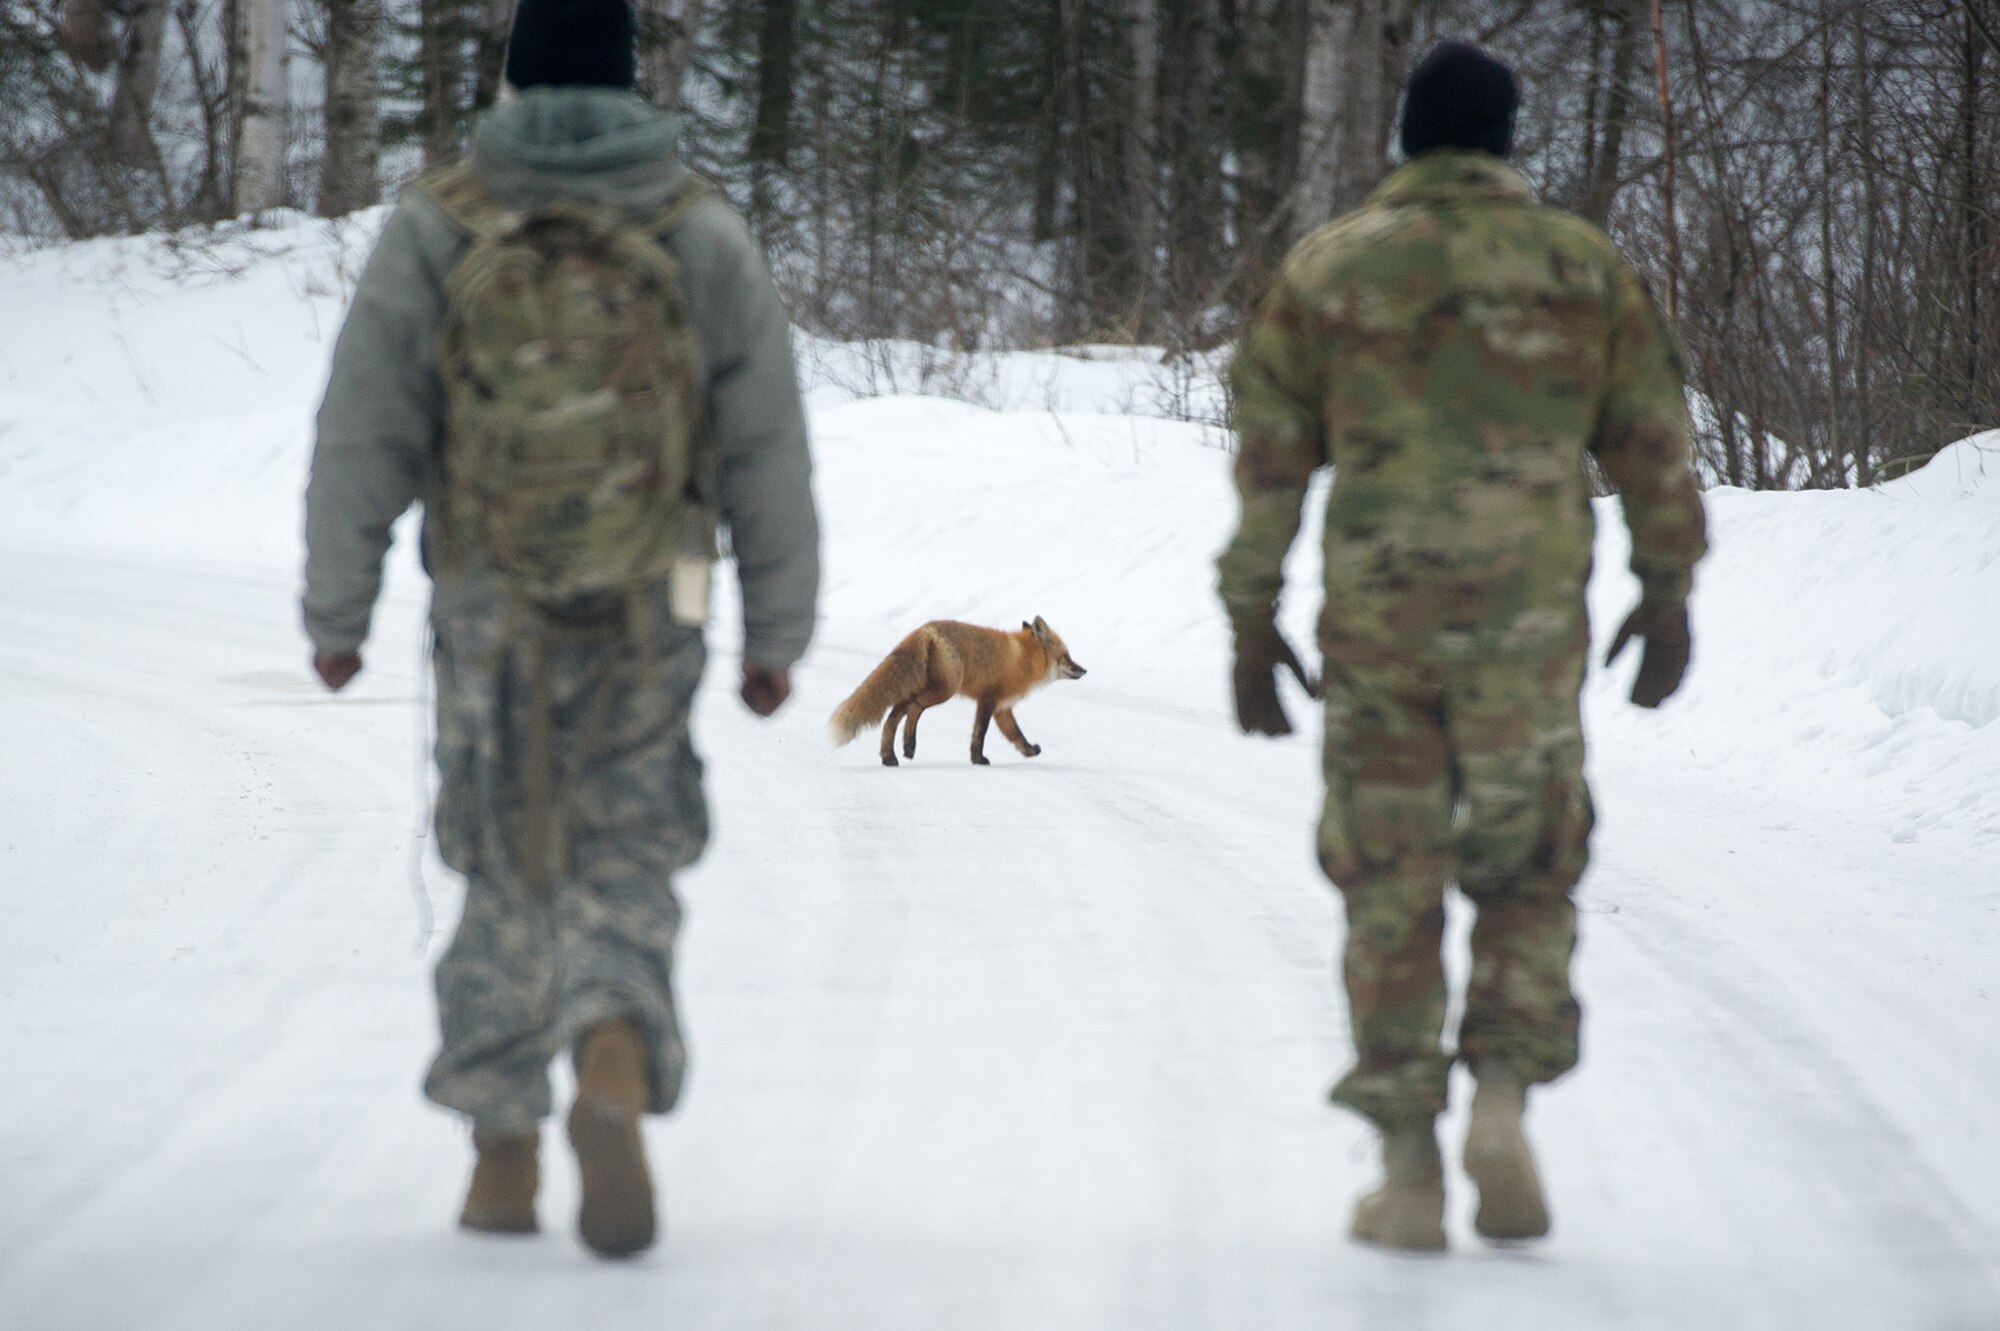 A fox crosses the road in front of paratroopers assigned to the 4th Infantry Brigade Combat Team (Airborne), 25th Infantry Division, U.S. Army Alaska, as they conduct a land navigation course on Joint Base Elmendorf-Richardson, Alaska, April 4, 2018.  The Soldiers used their skills to plot courses using a lensatic compass, protractor, and a 1:25,000 scale map to navigate to, and locate points using provided grid coordinates within a predetermined time.